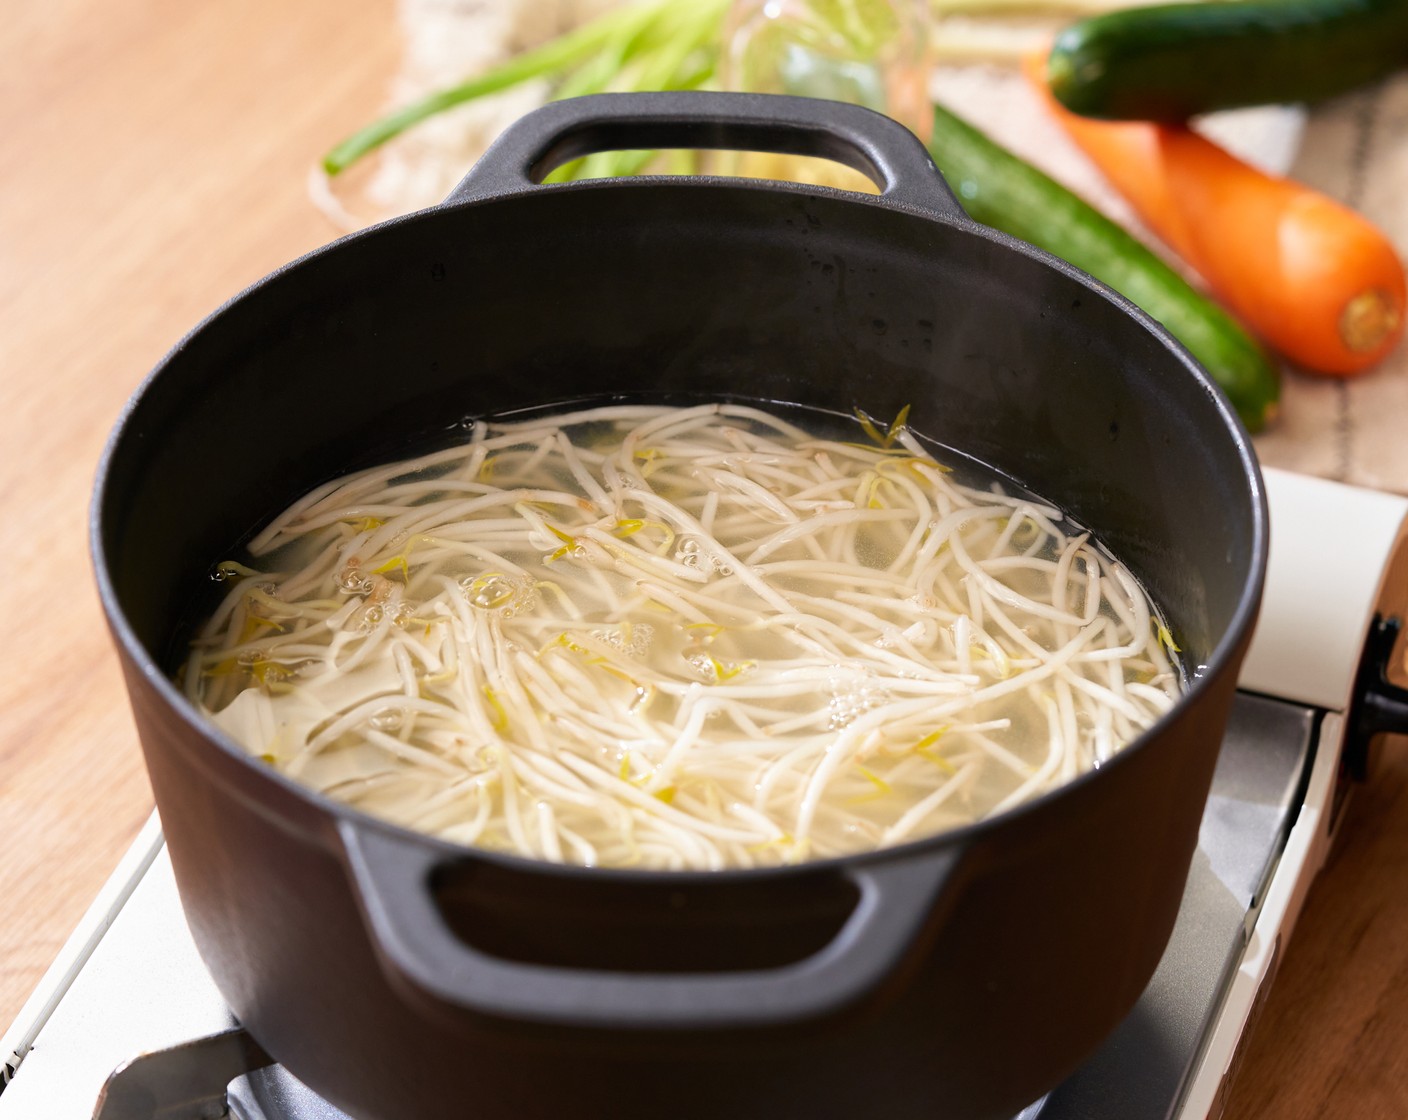 step 2 In the same pot with noodles and water over medium heat, blanch Bean Sprouts (1 can) for 1 minute, and transfer to a bowl to cool down.